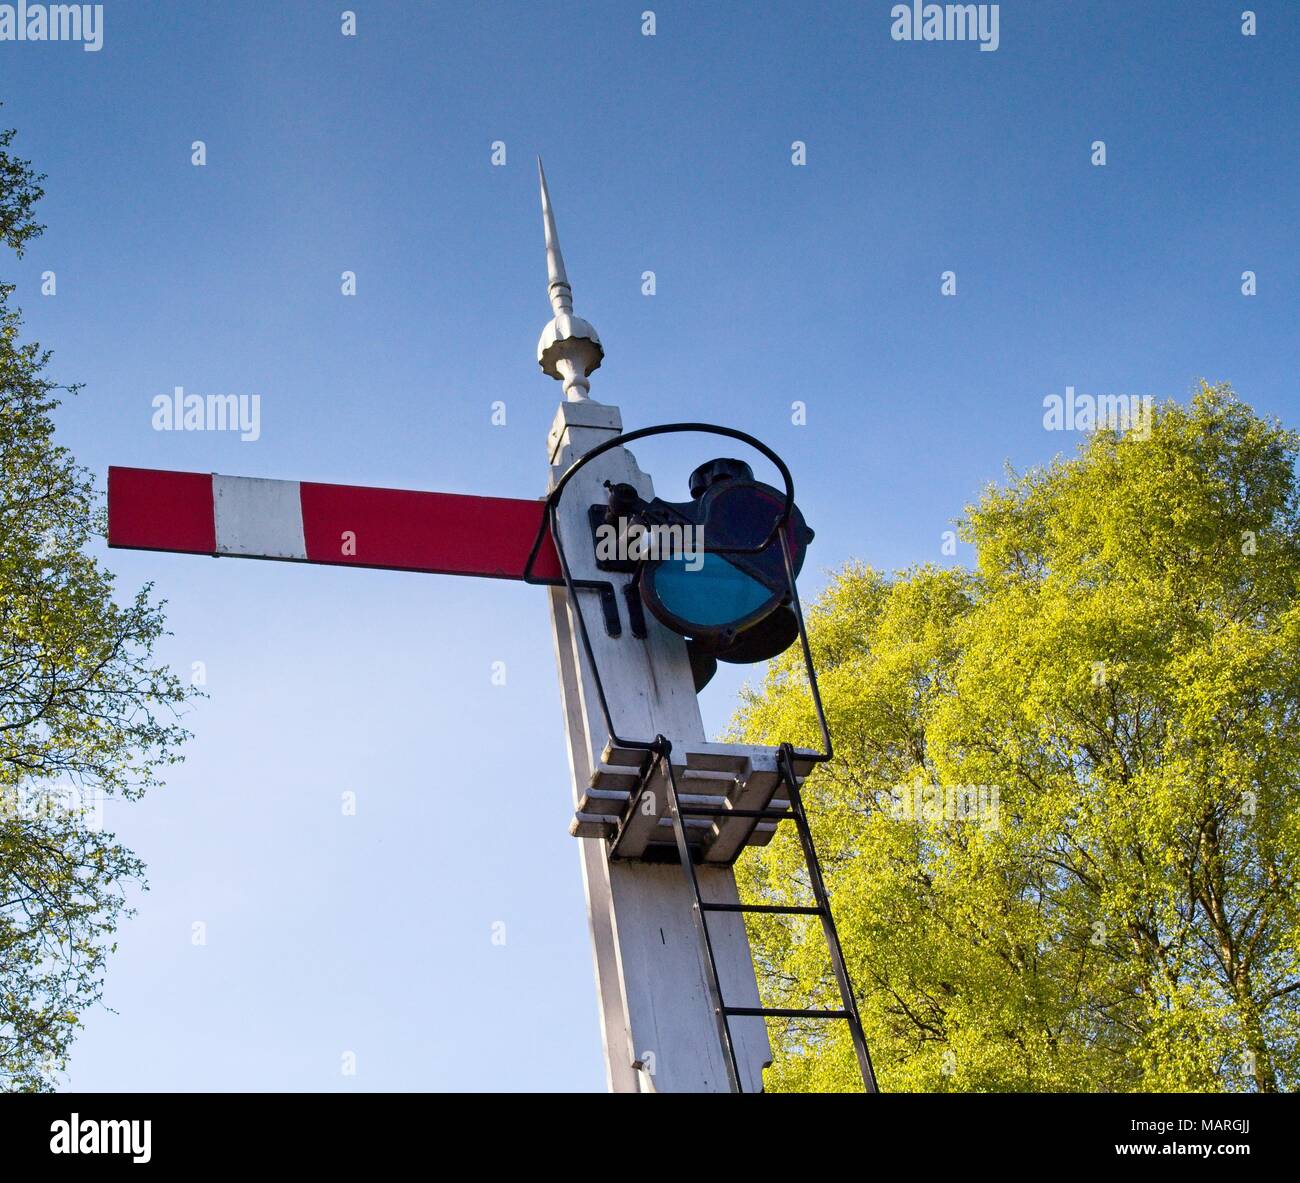 A closeup view of a vintage railway signal in the stop position, against a blue sky. Stock Photo